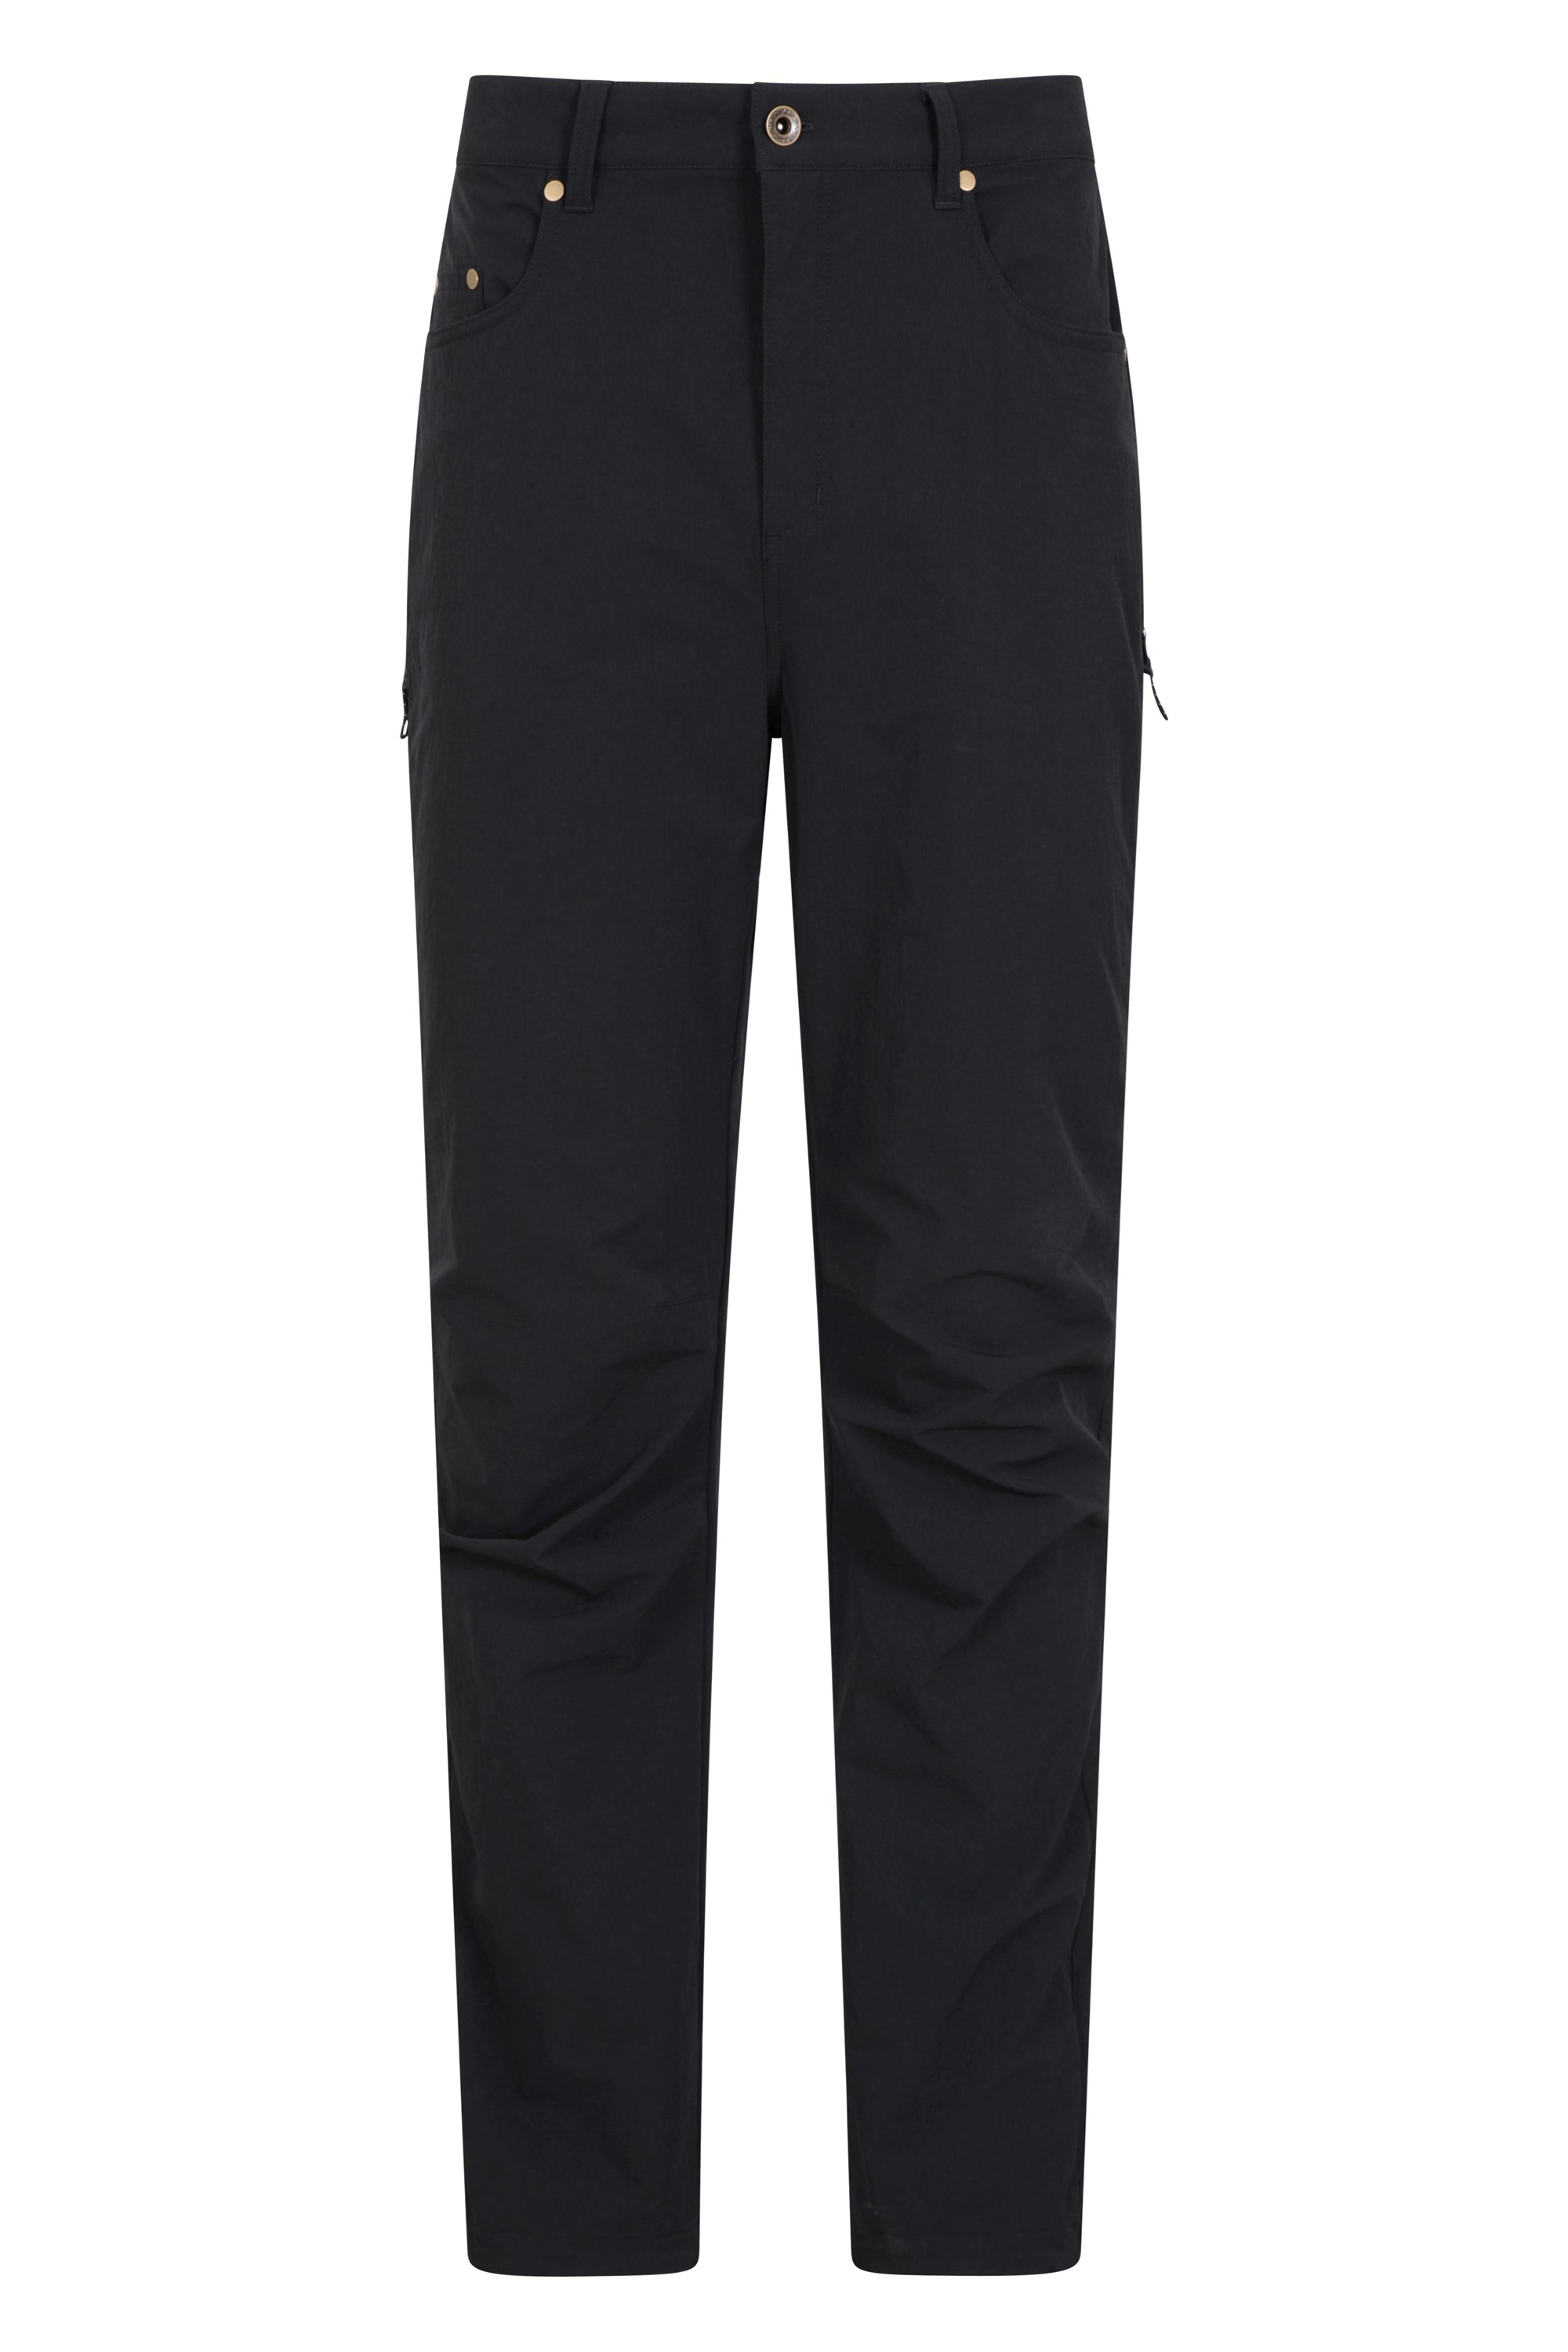 Anthracite Mens Outdoor Trousers - Short Length - Black